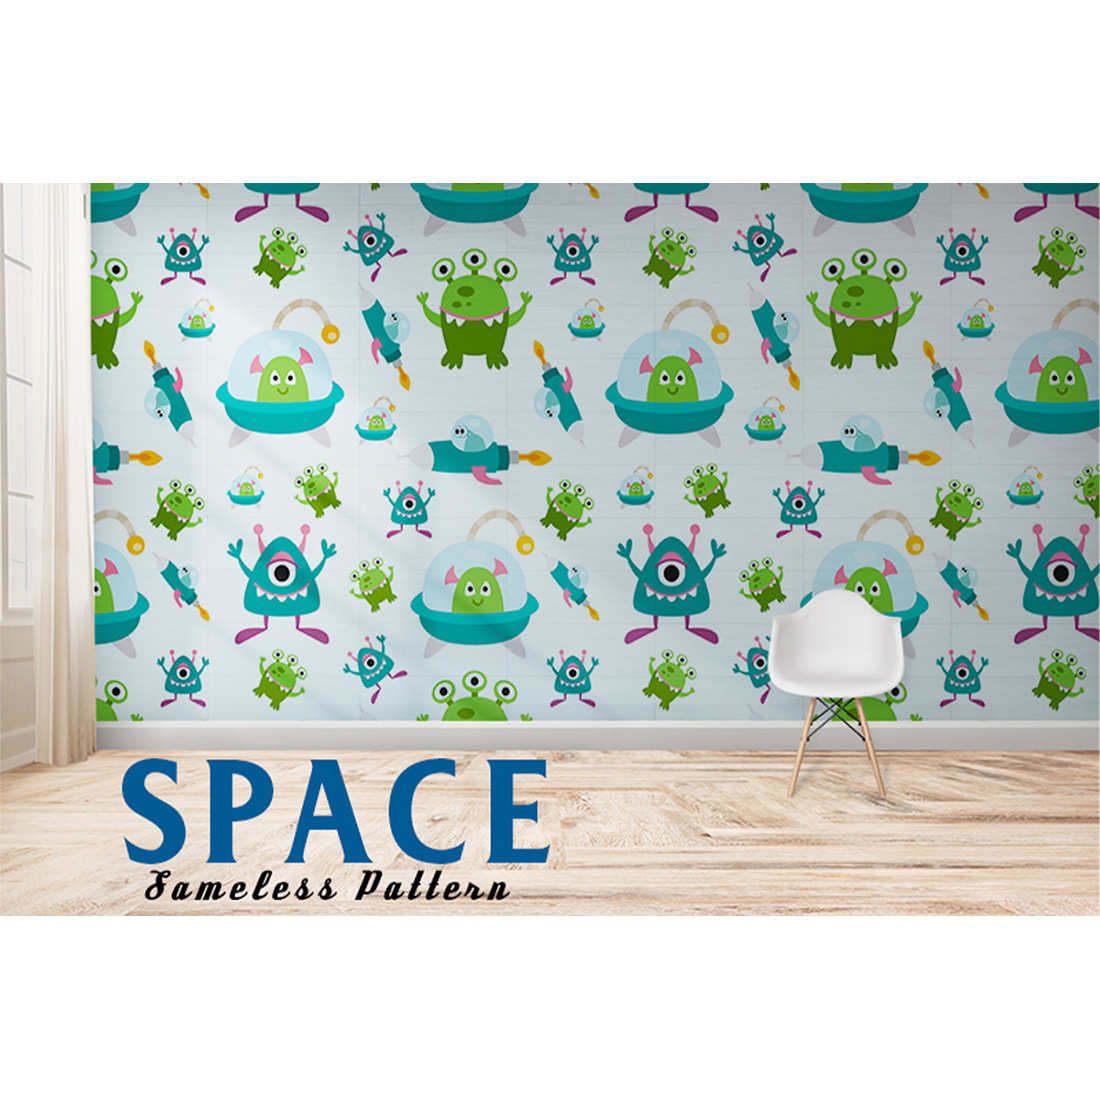 Image with irresistible patterns on the theme of space